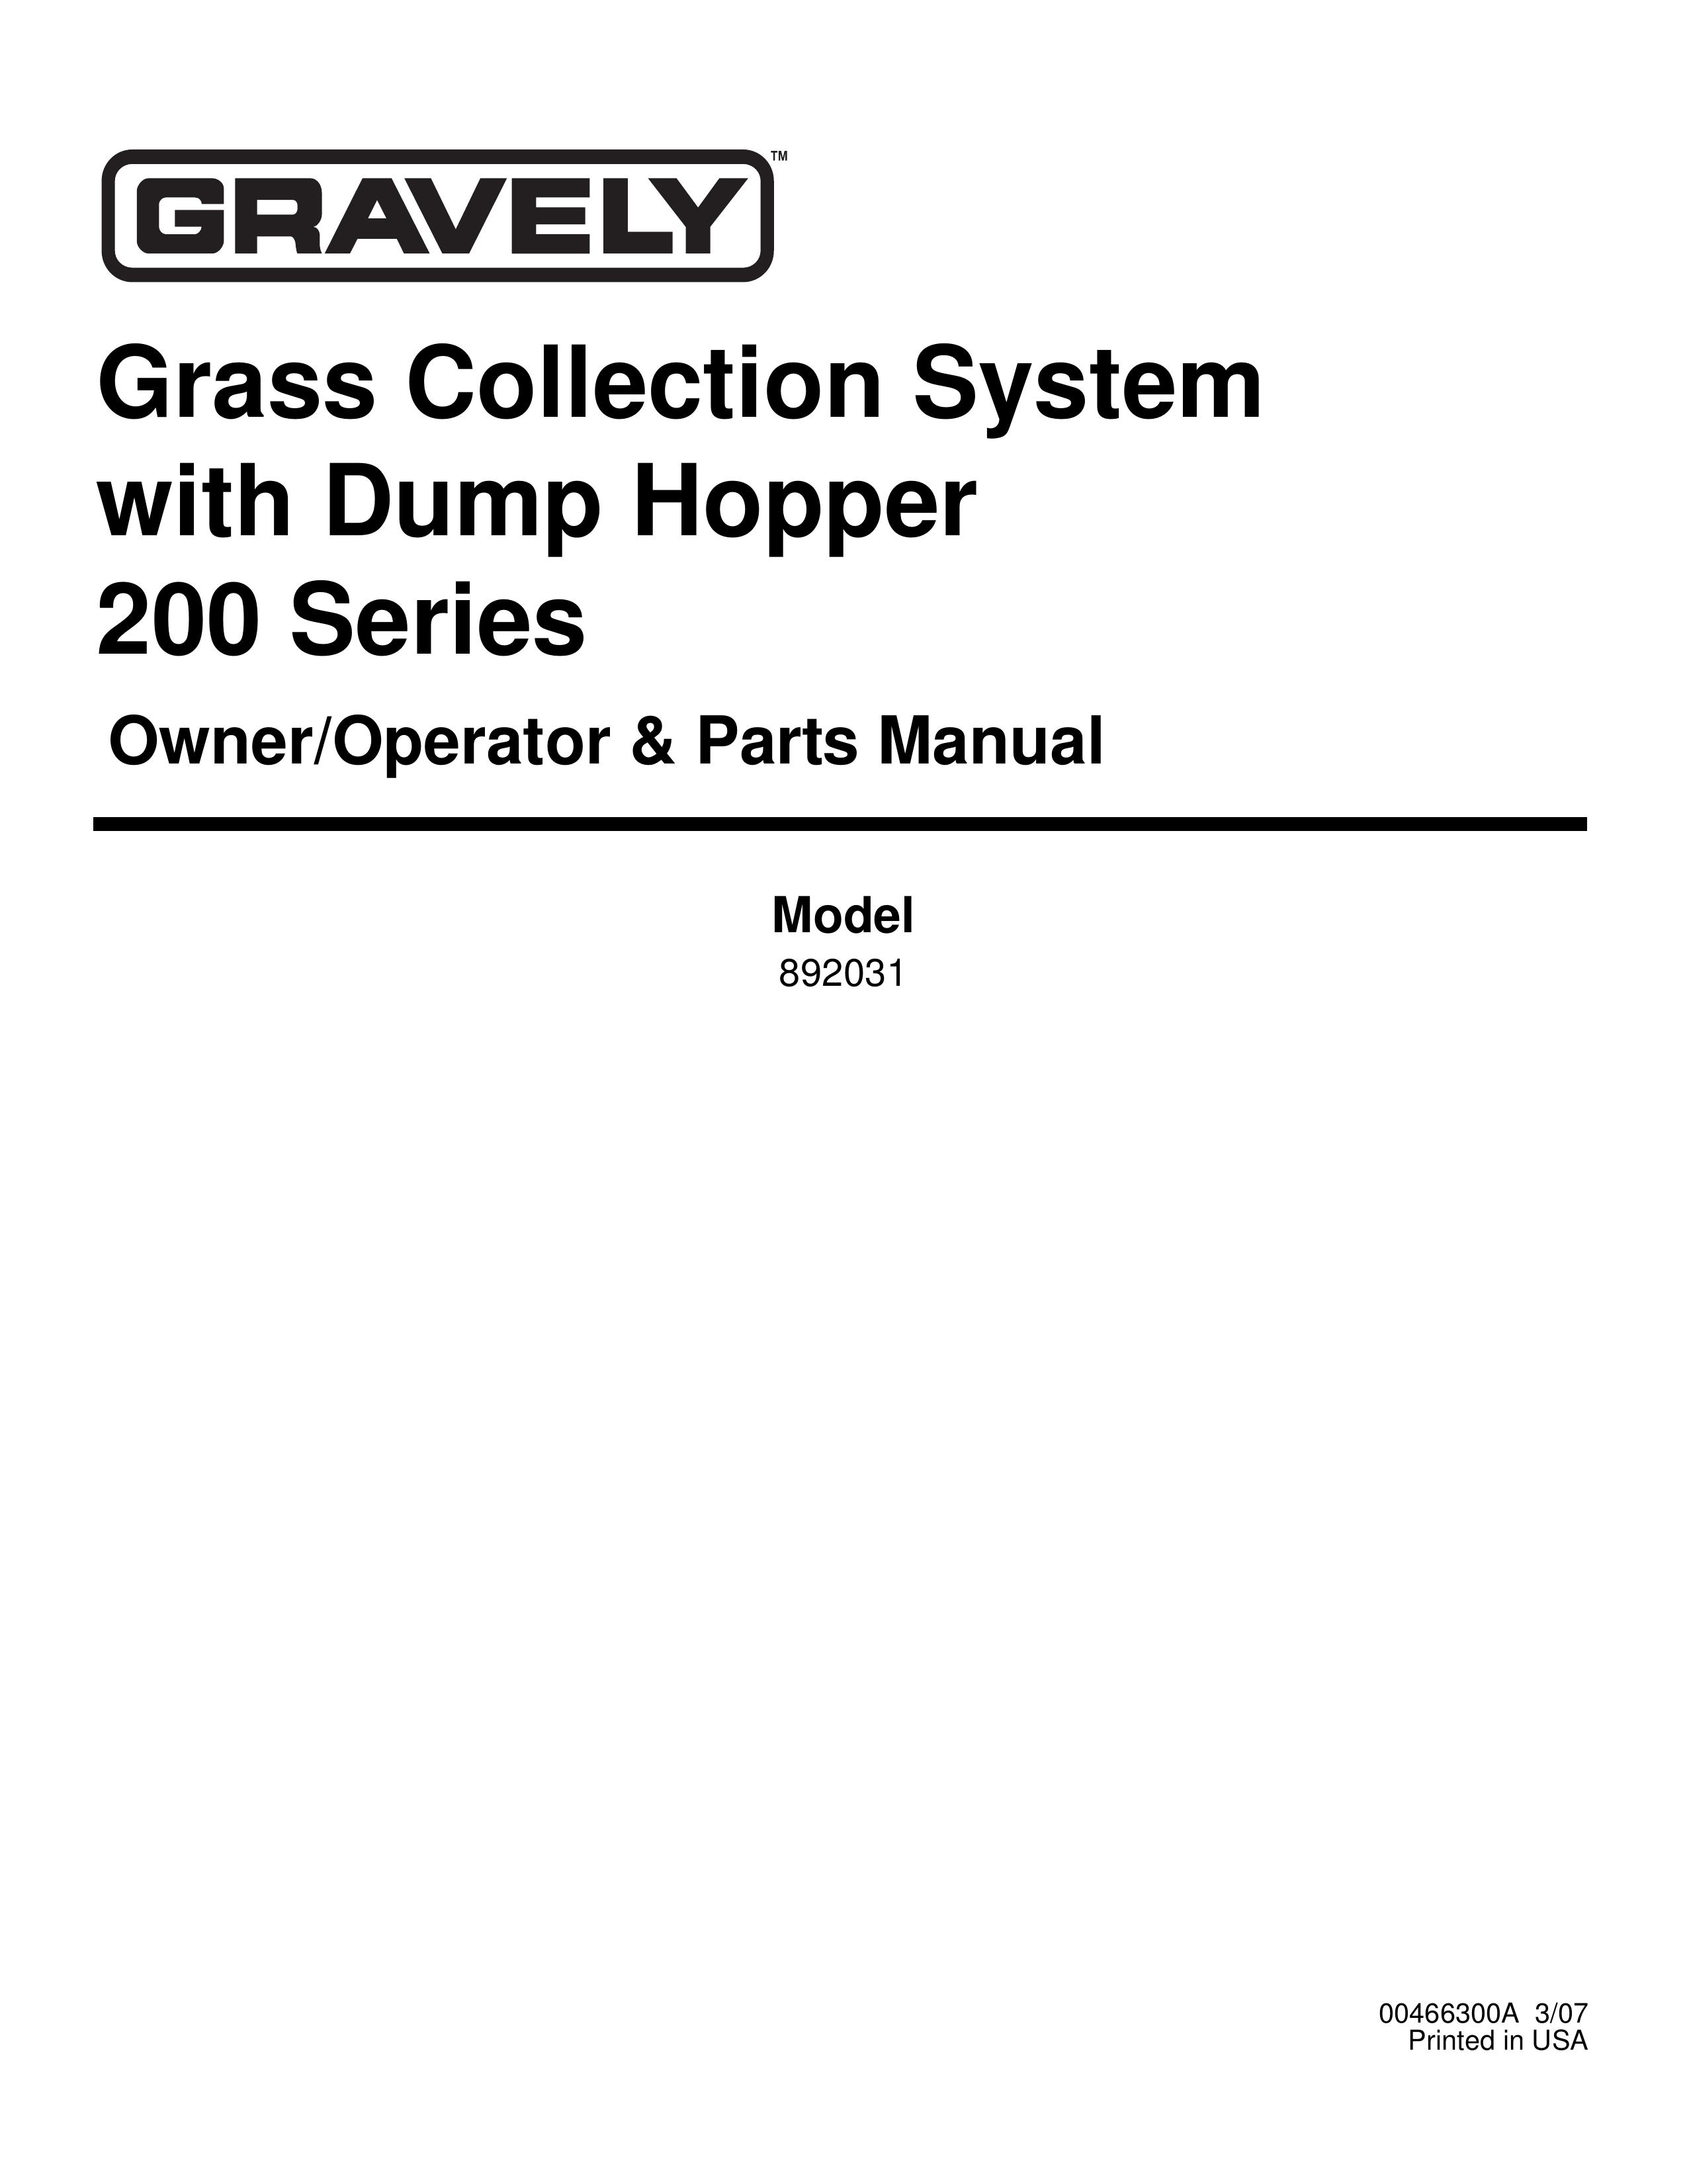 Gravely 892031 Lawn Mower Accessory User Manual